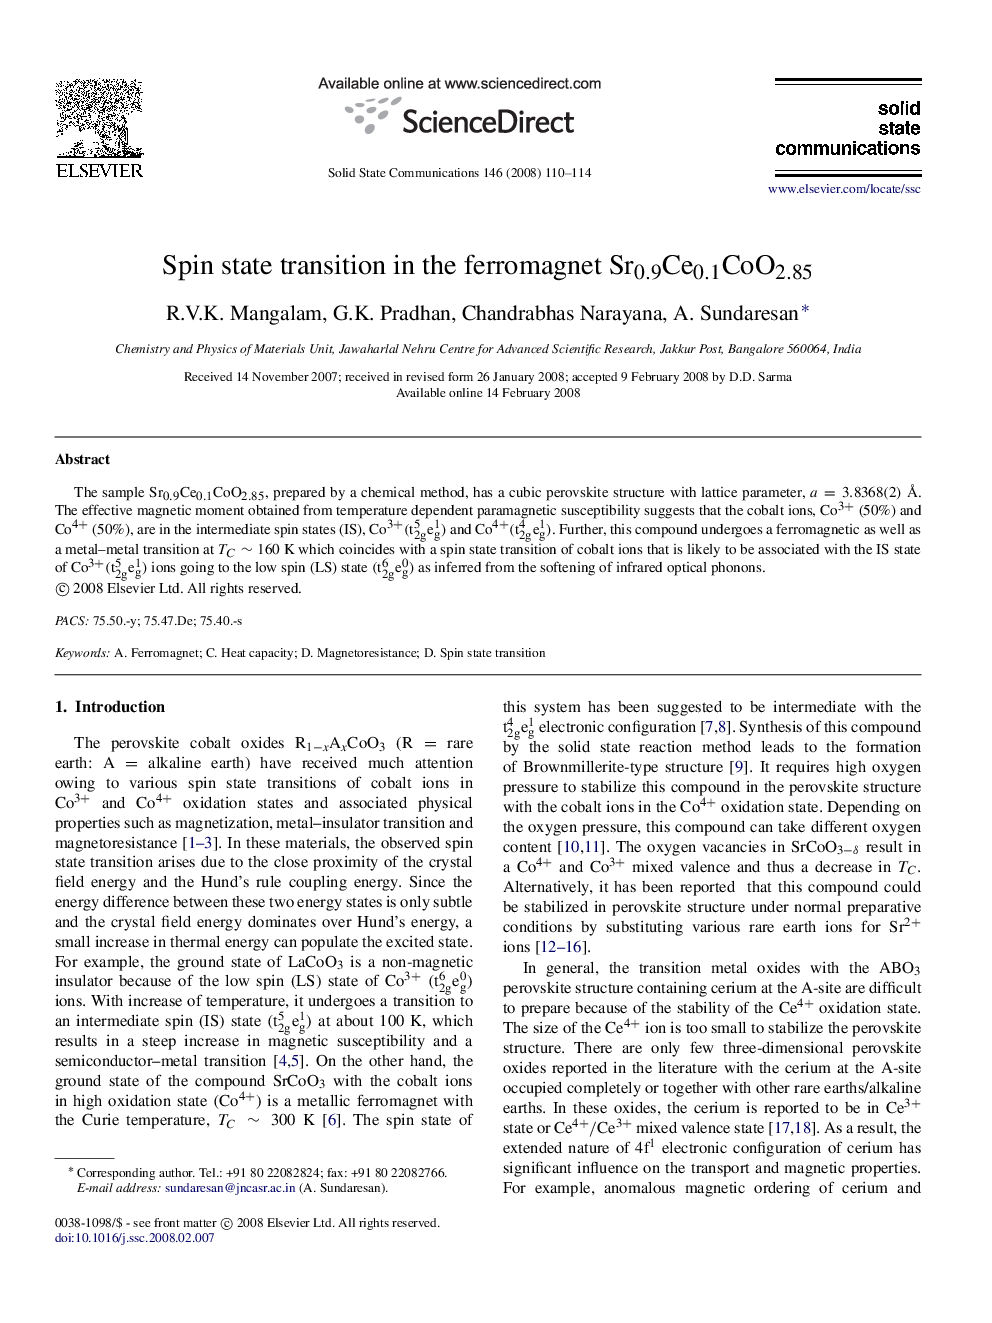 Spin state transition in the ferromagnet Sr0.9Ce0.1CoO2.85